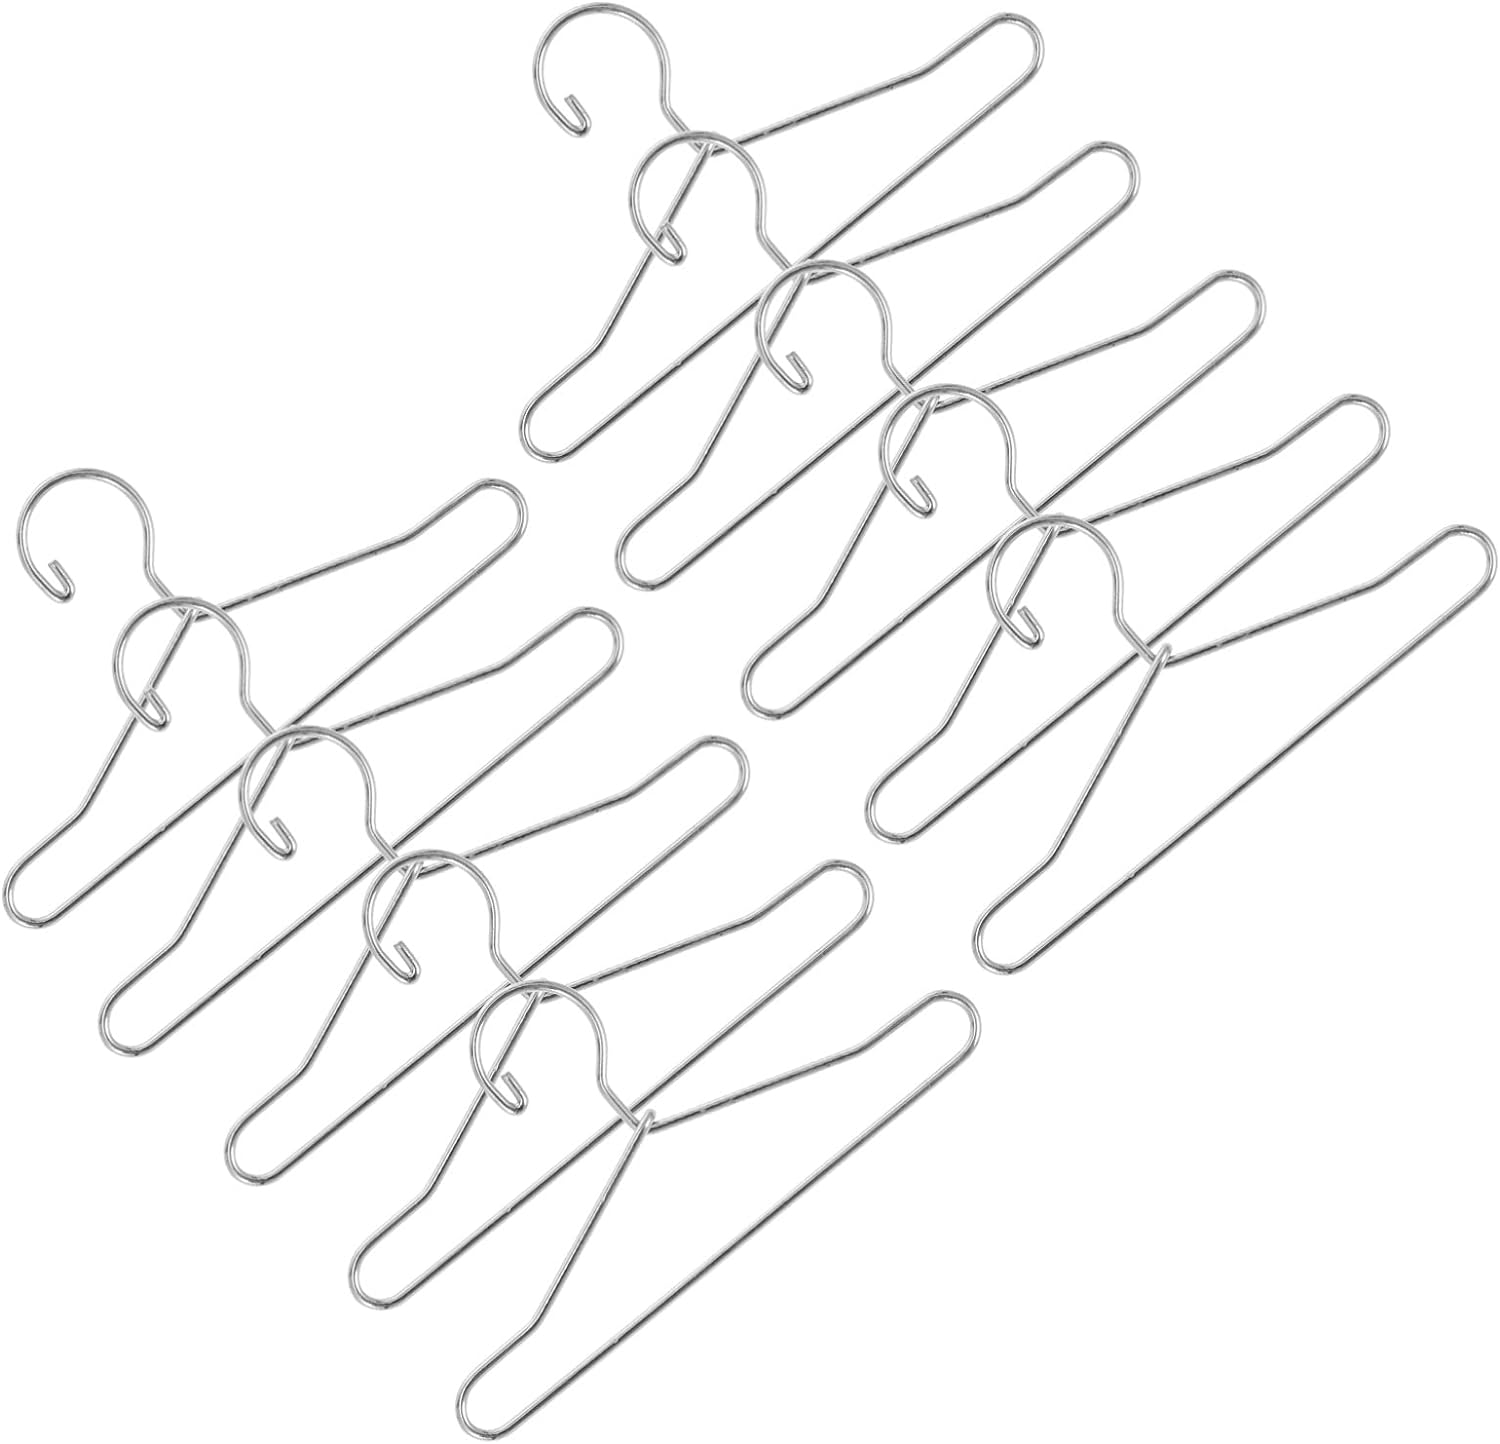 7 PC White Star Hangers Fits 12-14 Inch Doll Clothes